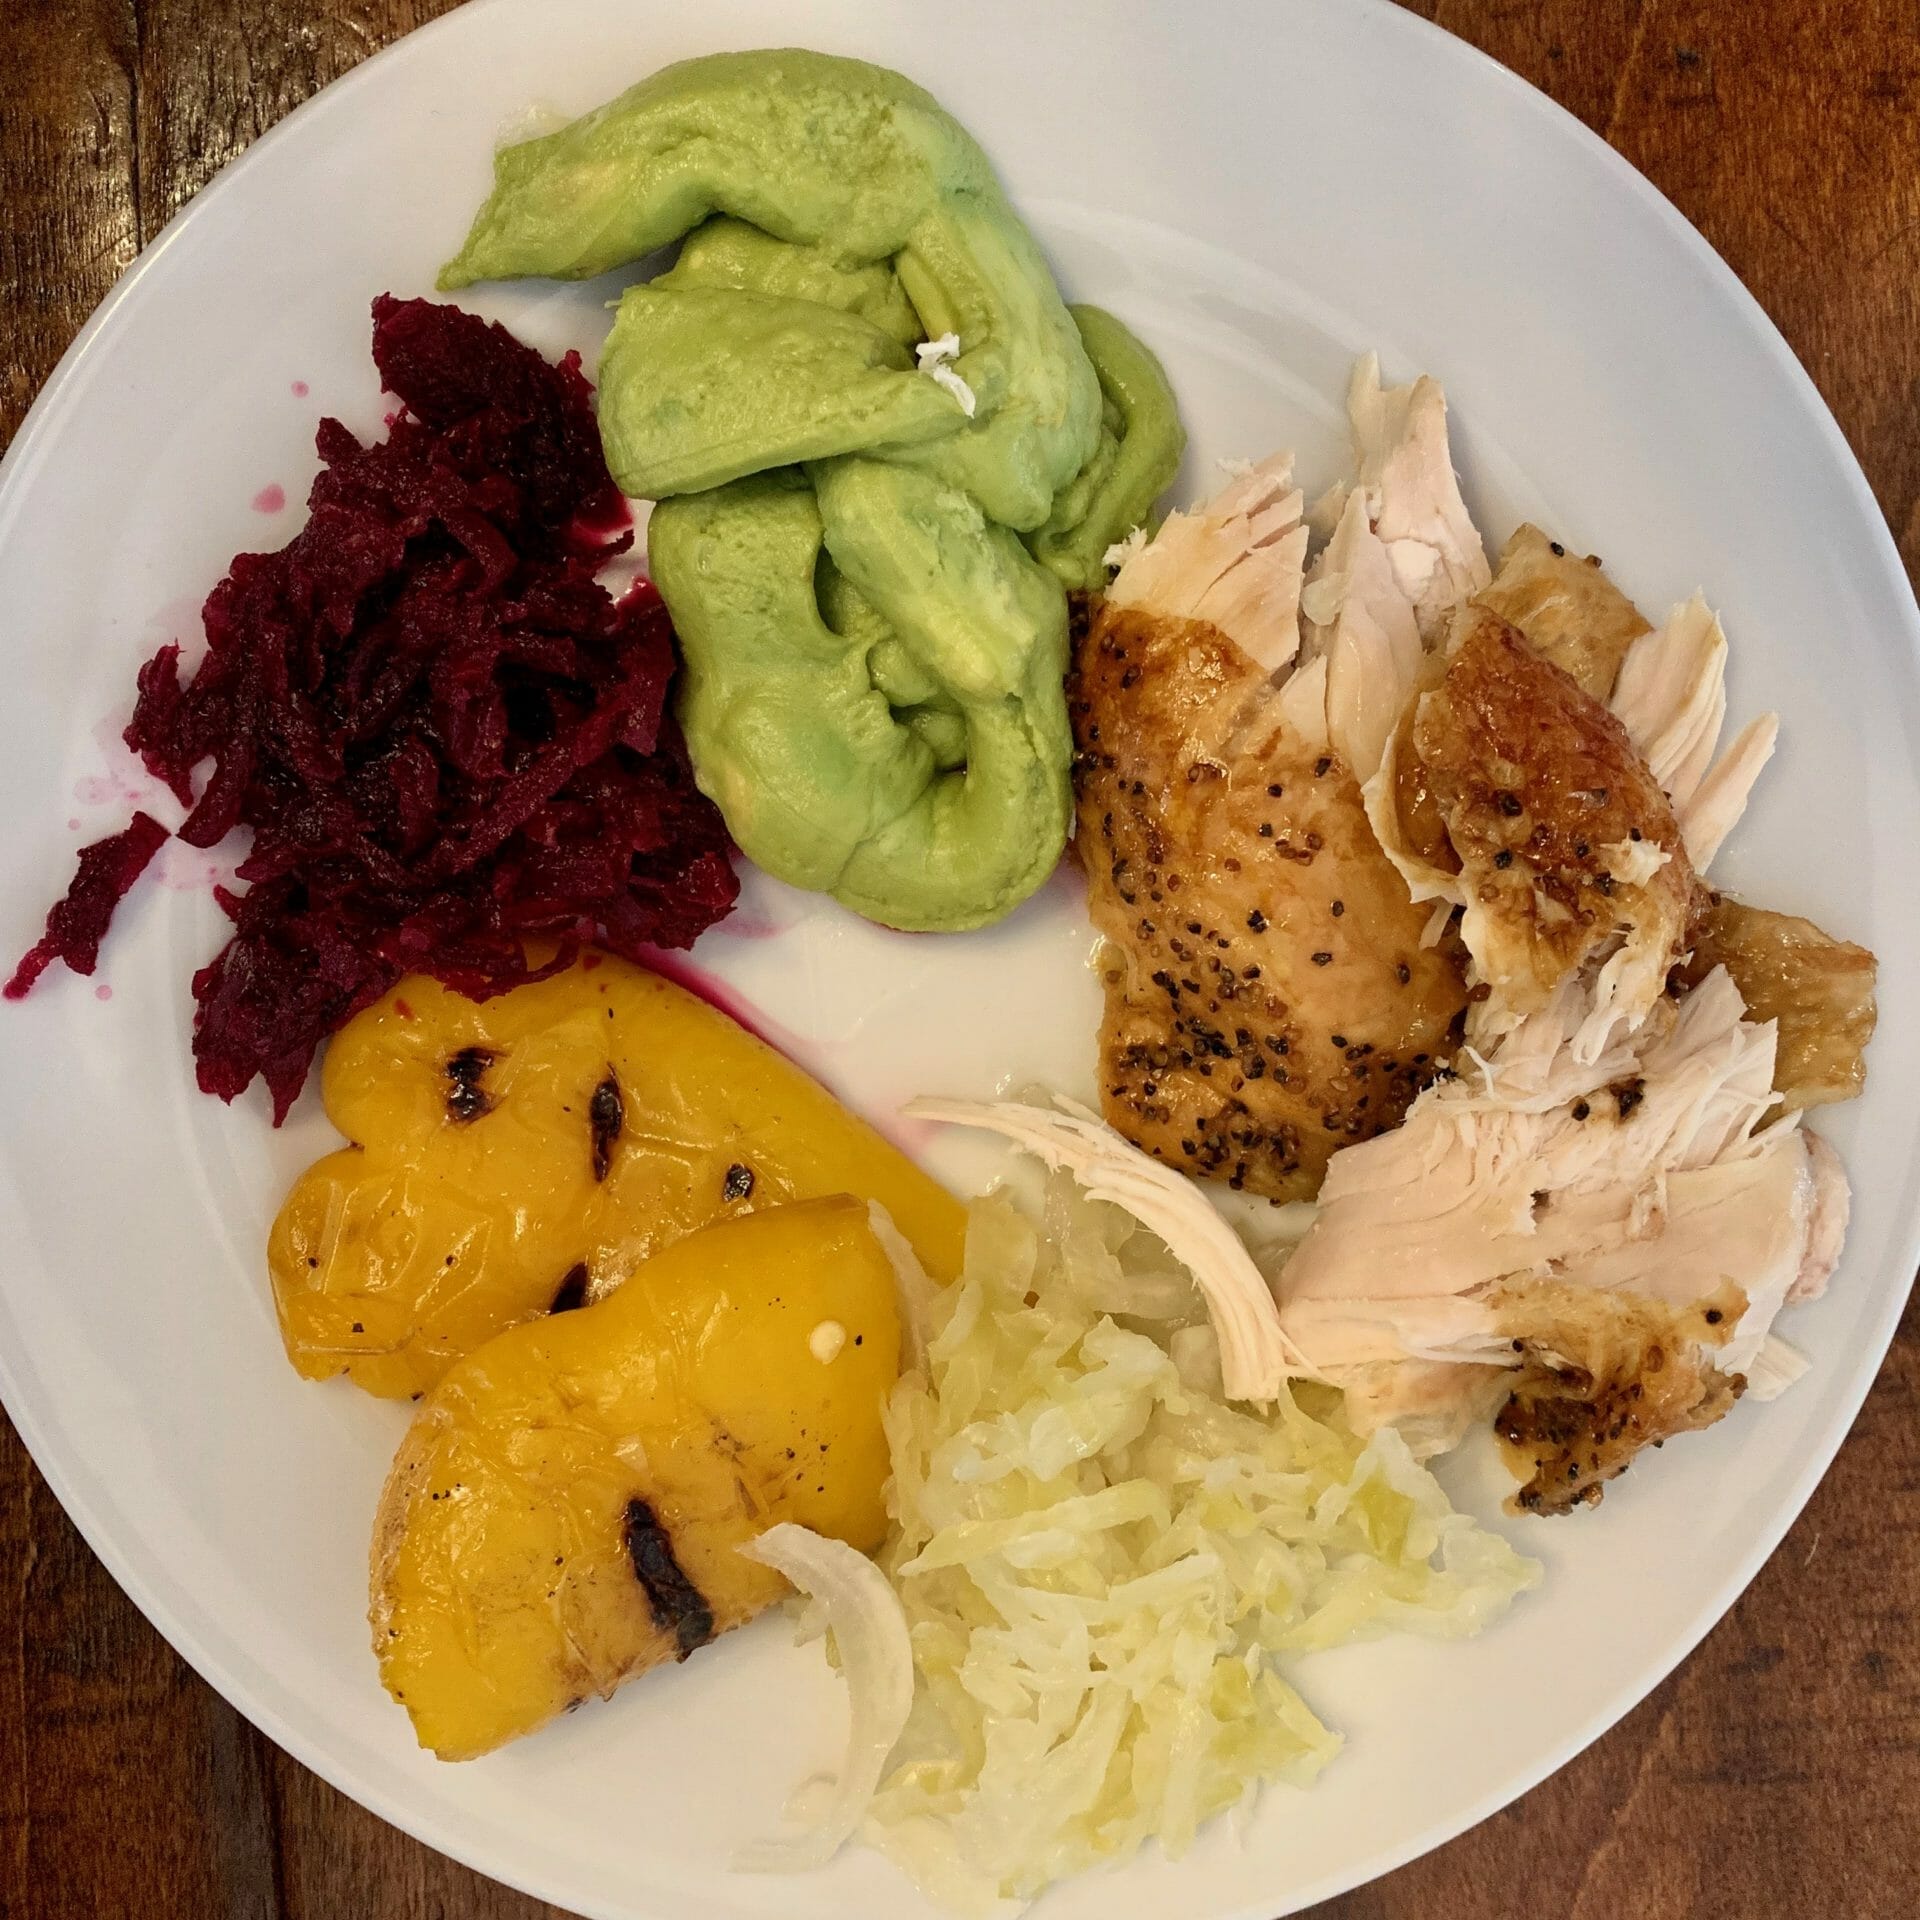 Organic rotisserie chicken (Whole Foods) with grilled peppers, fermented red beets, sauerkraut and guacamole (Costco)